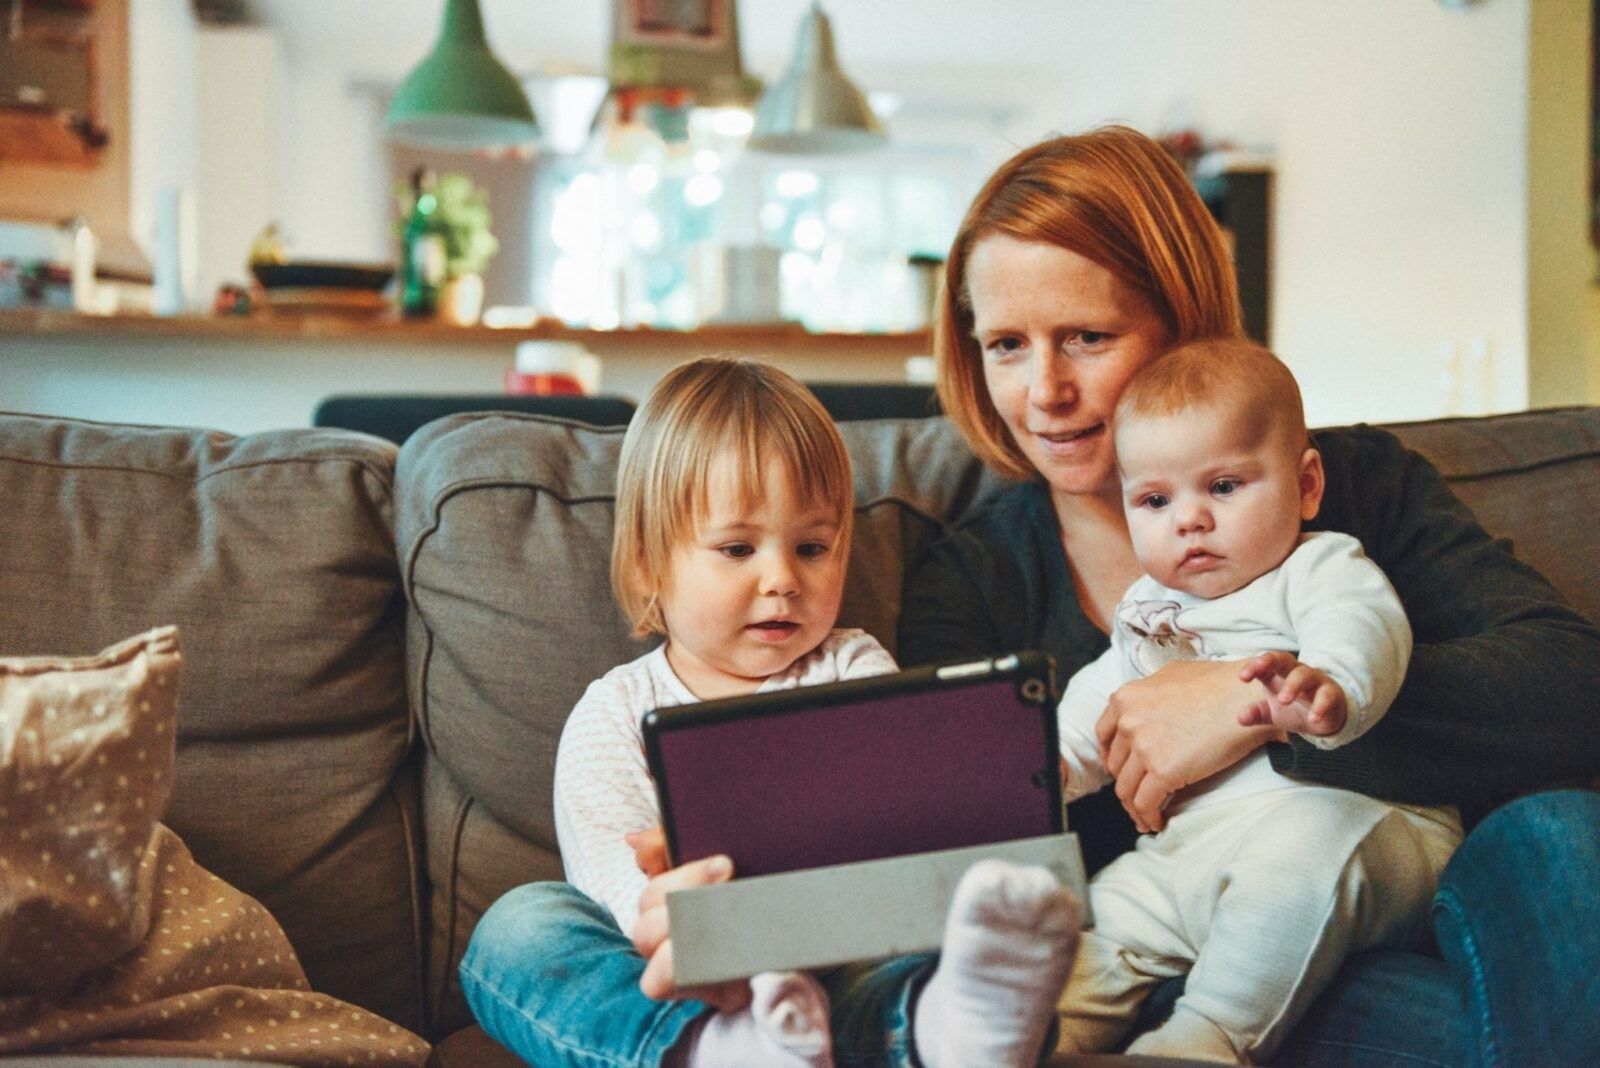 Woman-on-a-tablet-with-kids